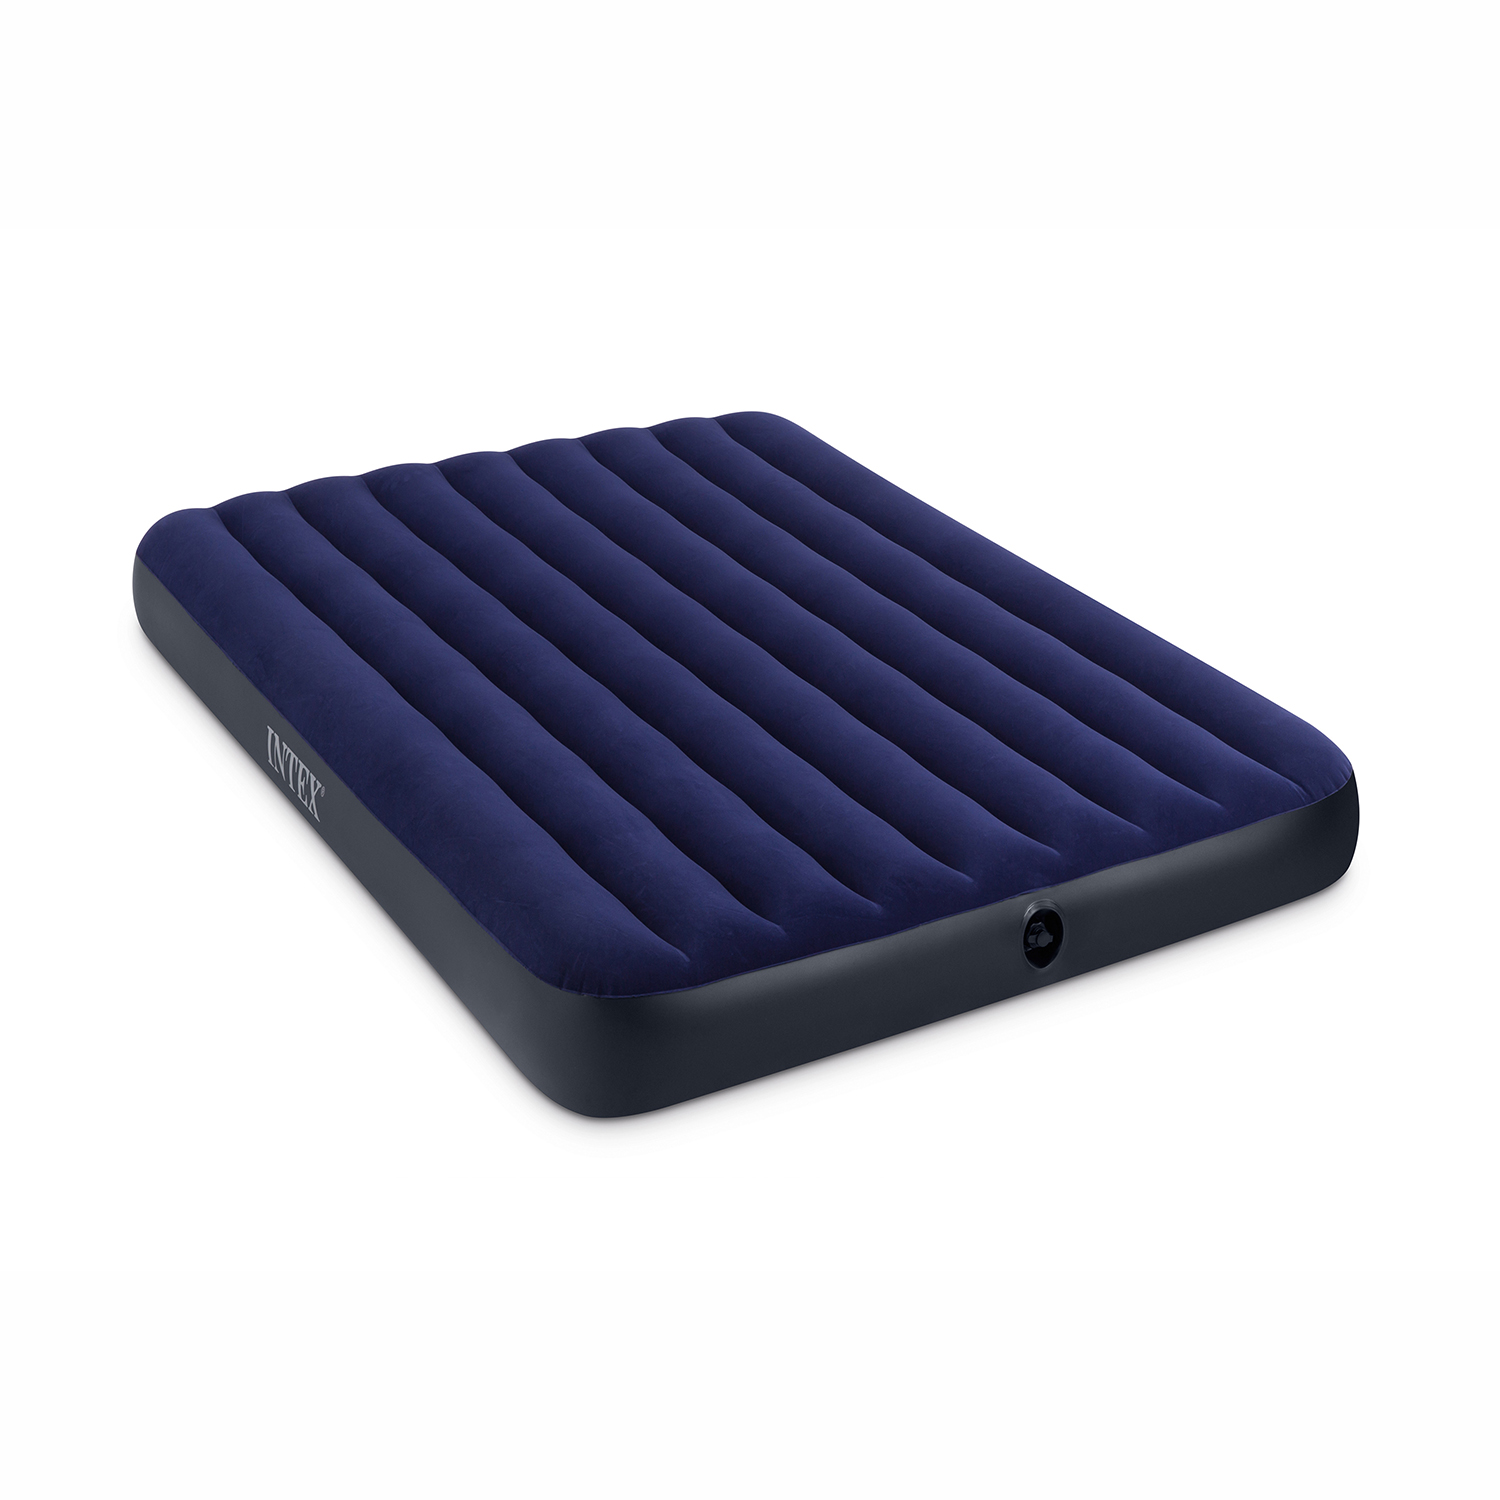 Intex 8.75" Classic Downy Inflatable Airbed Mattress, Queen - image 3 of 6